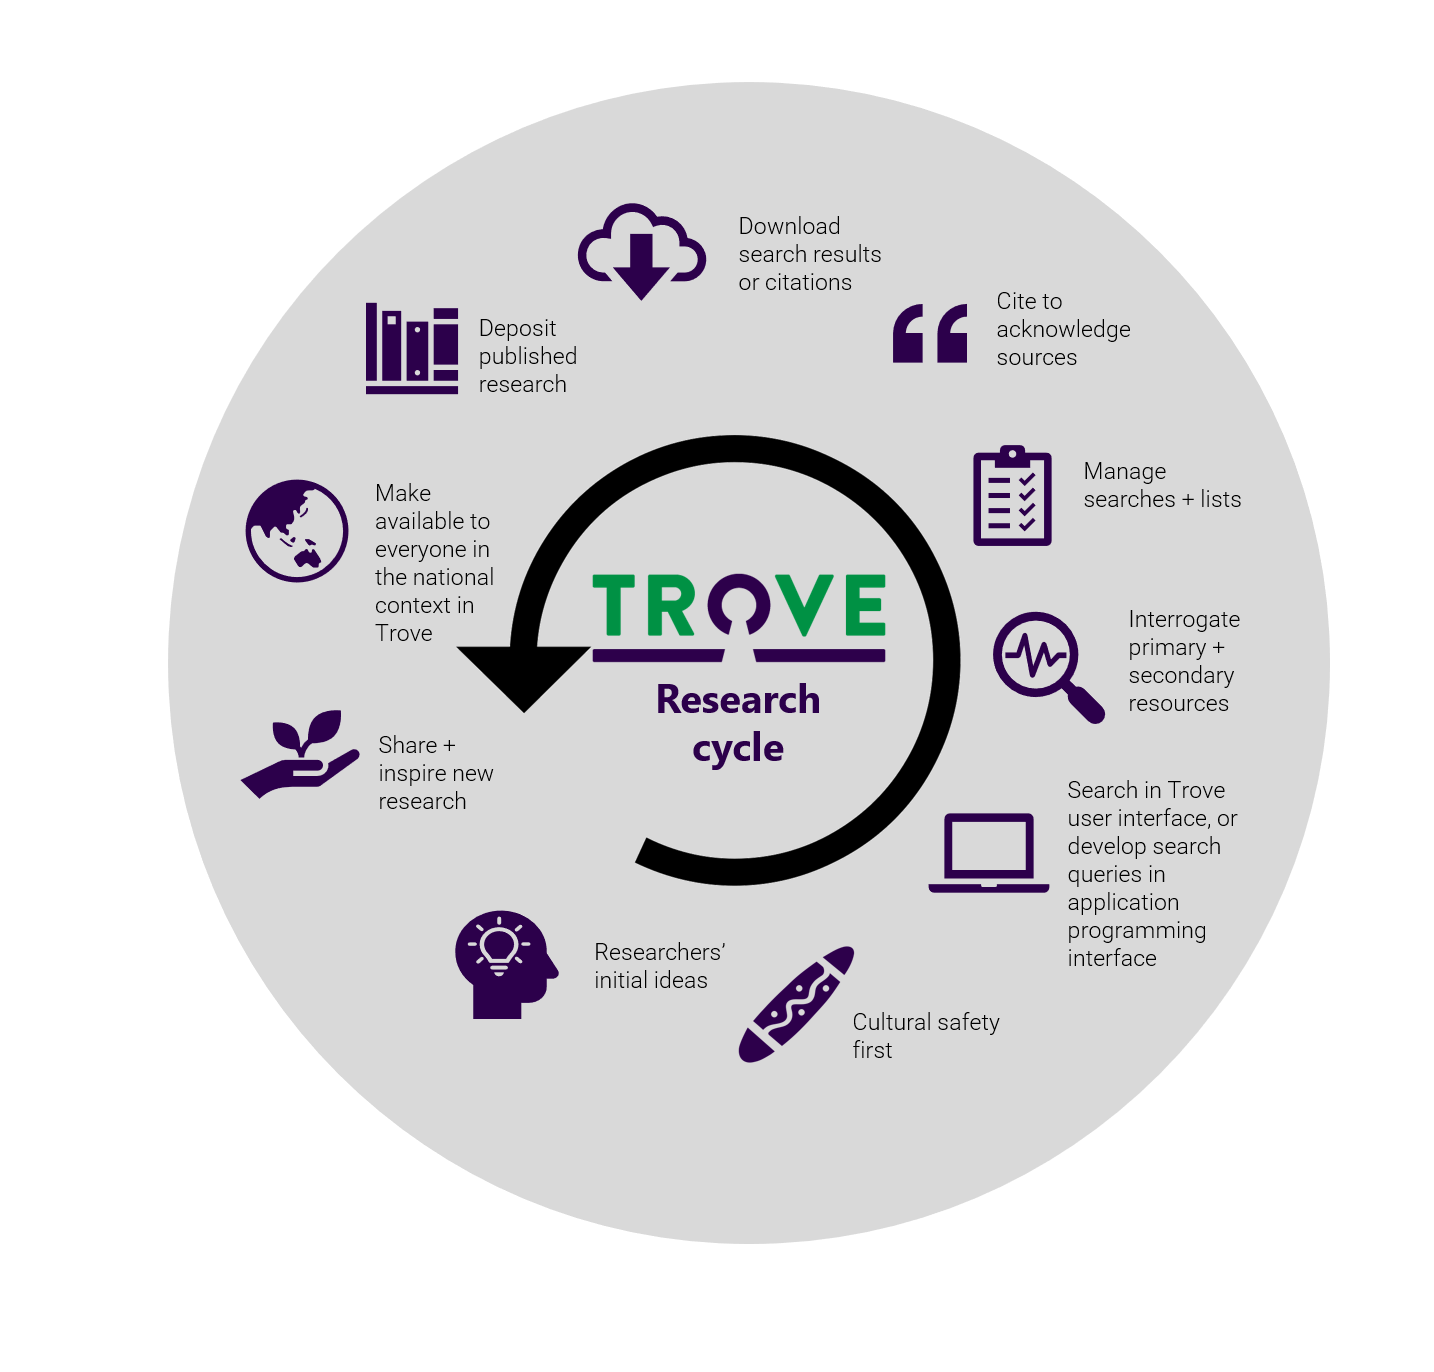 graphic of the Trove research cycle - initial idea, cultural safety first, search, interrogate primary and secondary resources, manage searches and lists, cite to acknowledge sources, download search results or citations, deposit published research, make available to everyone in the national context in Trove, share and inspire new research